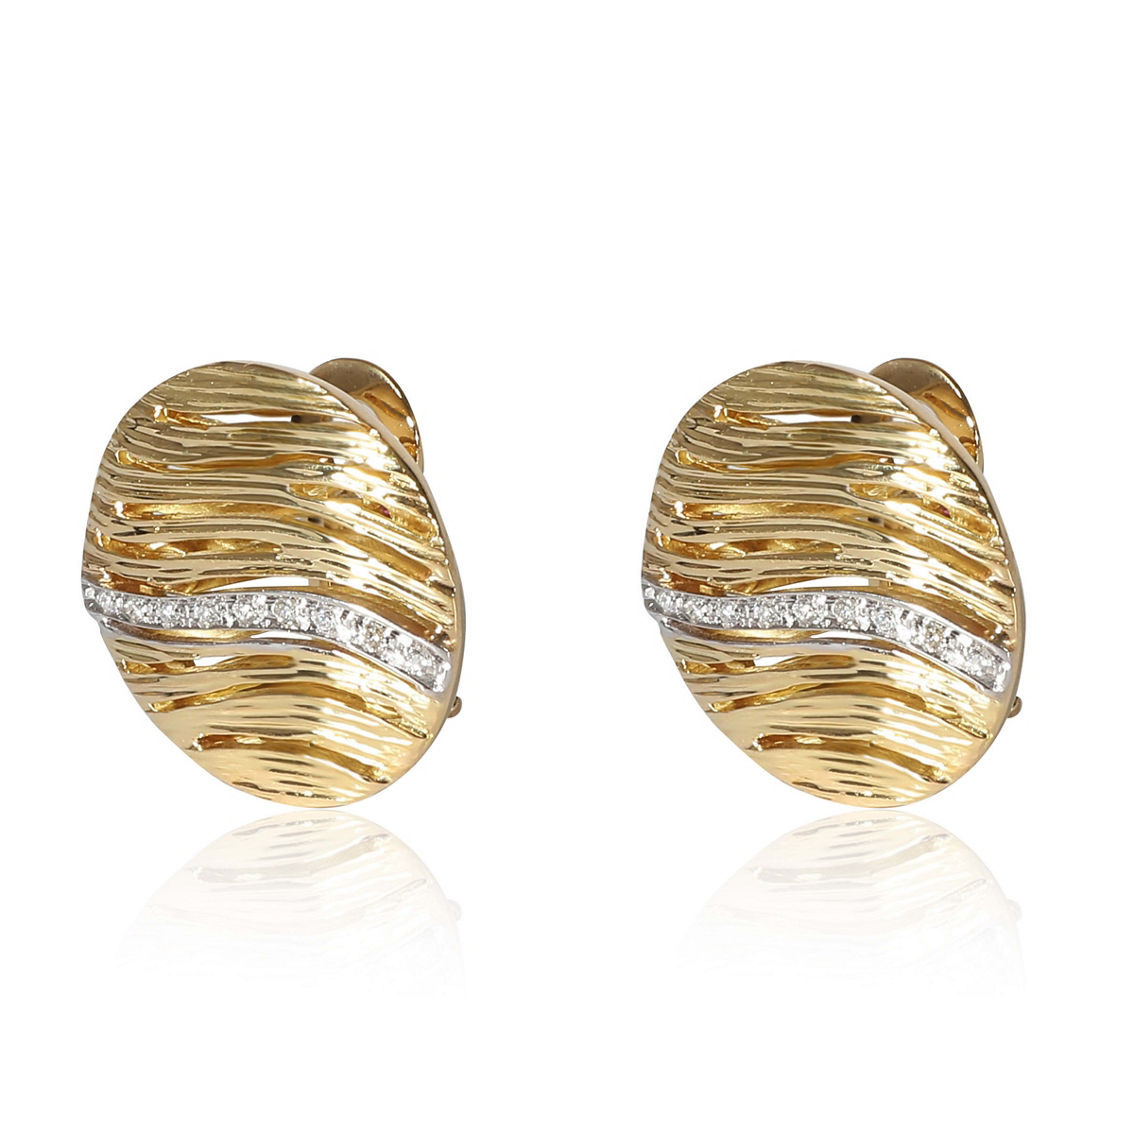 Roberto Coin Elefantino Earrings Pre-Owned - Image 2 of 2